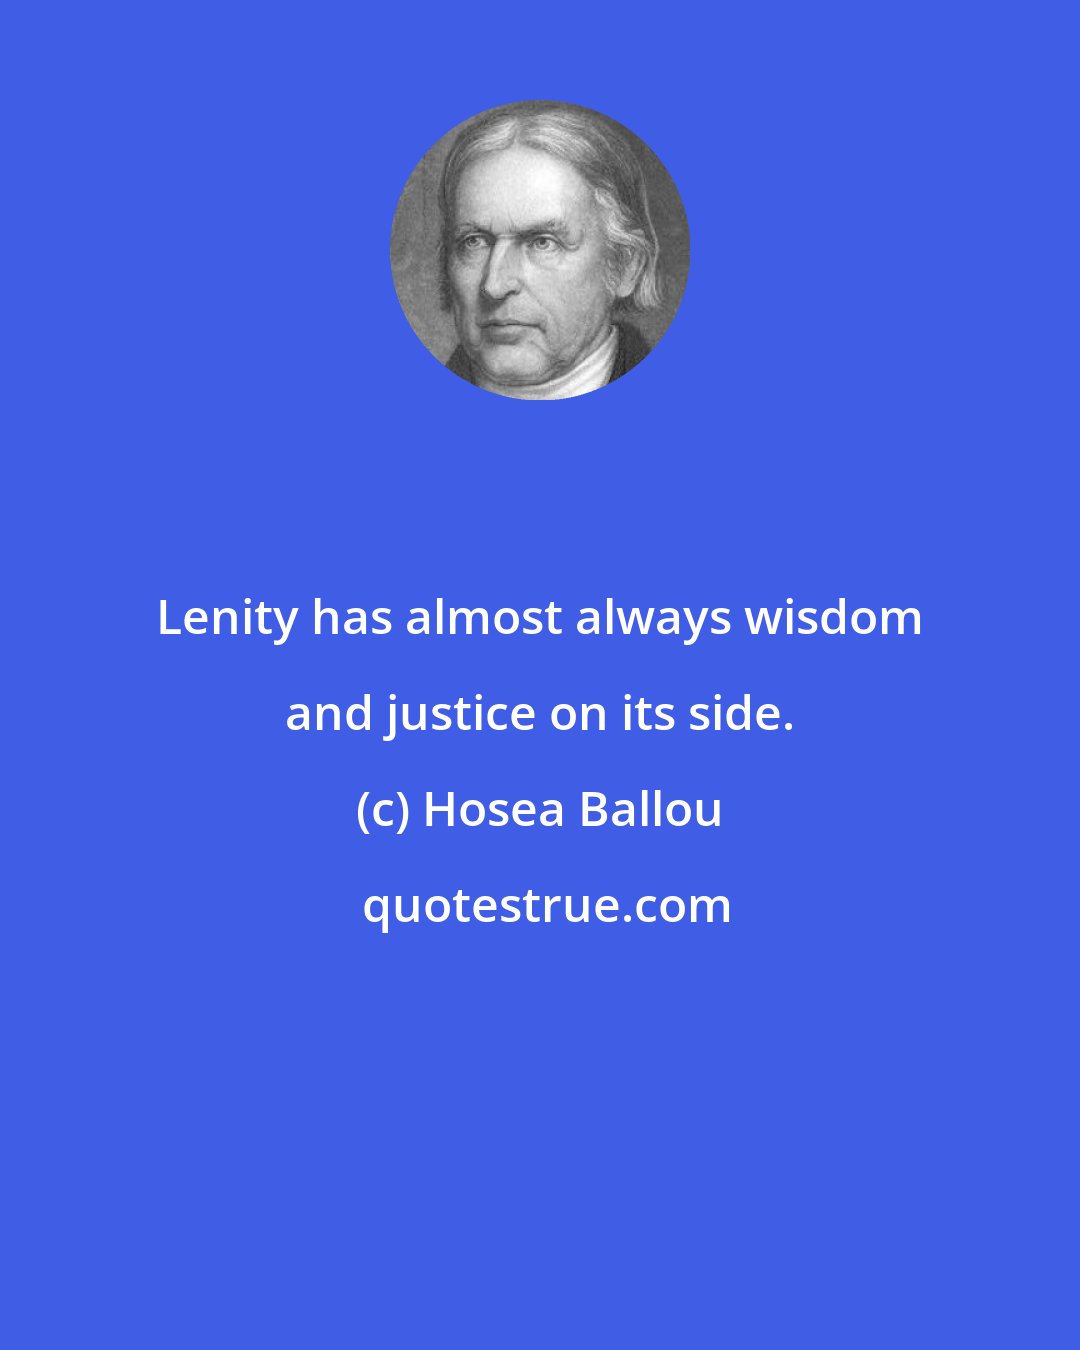 Hosea Ballou: Lenity has almost always wisdom and justice on its side.